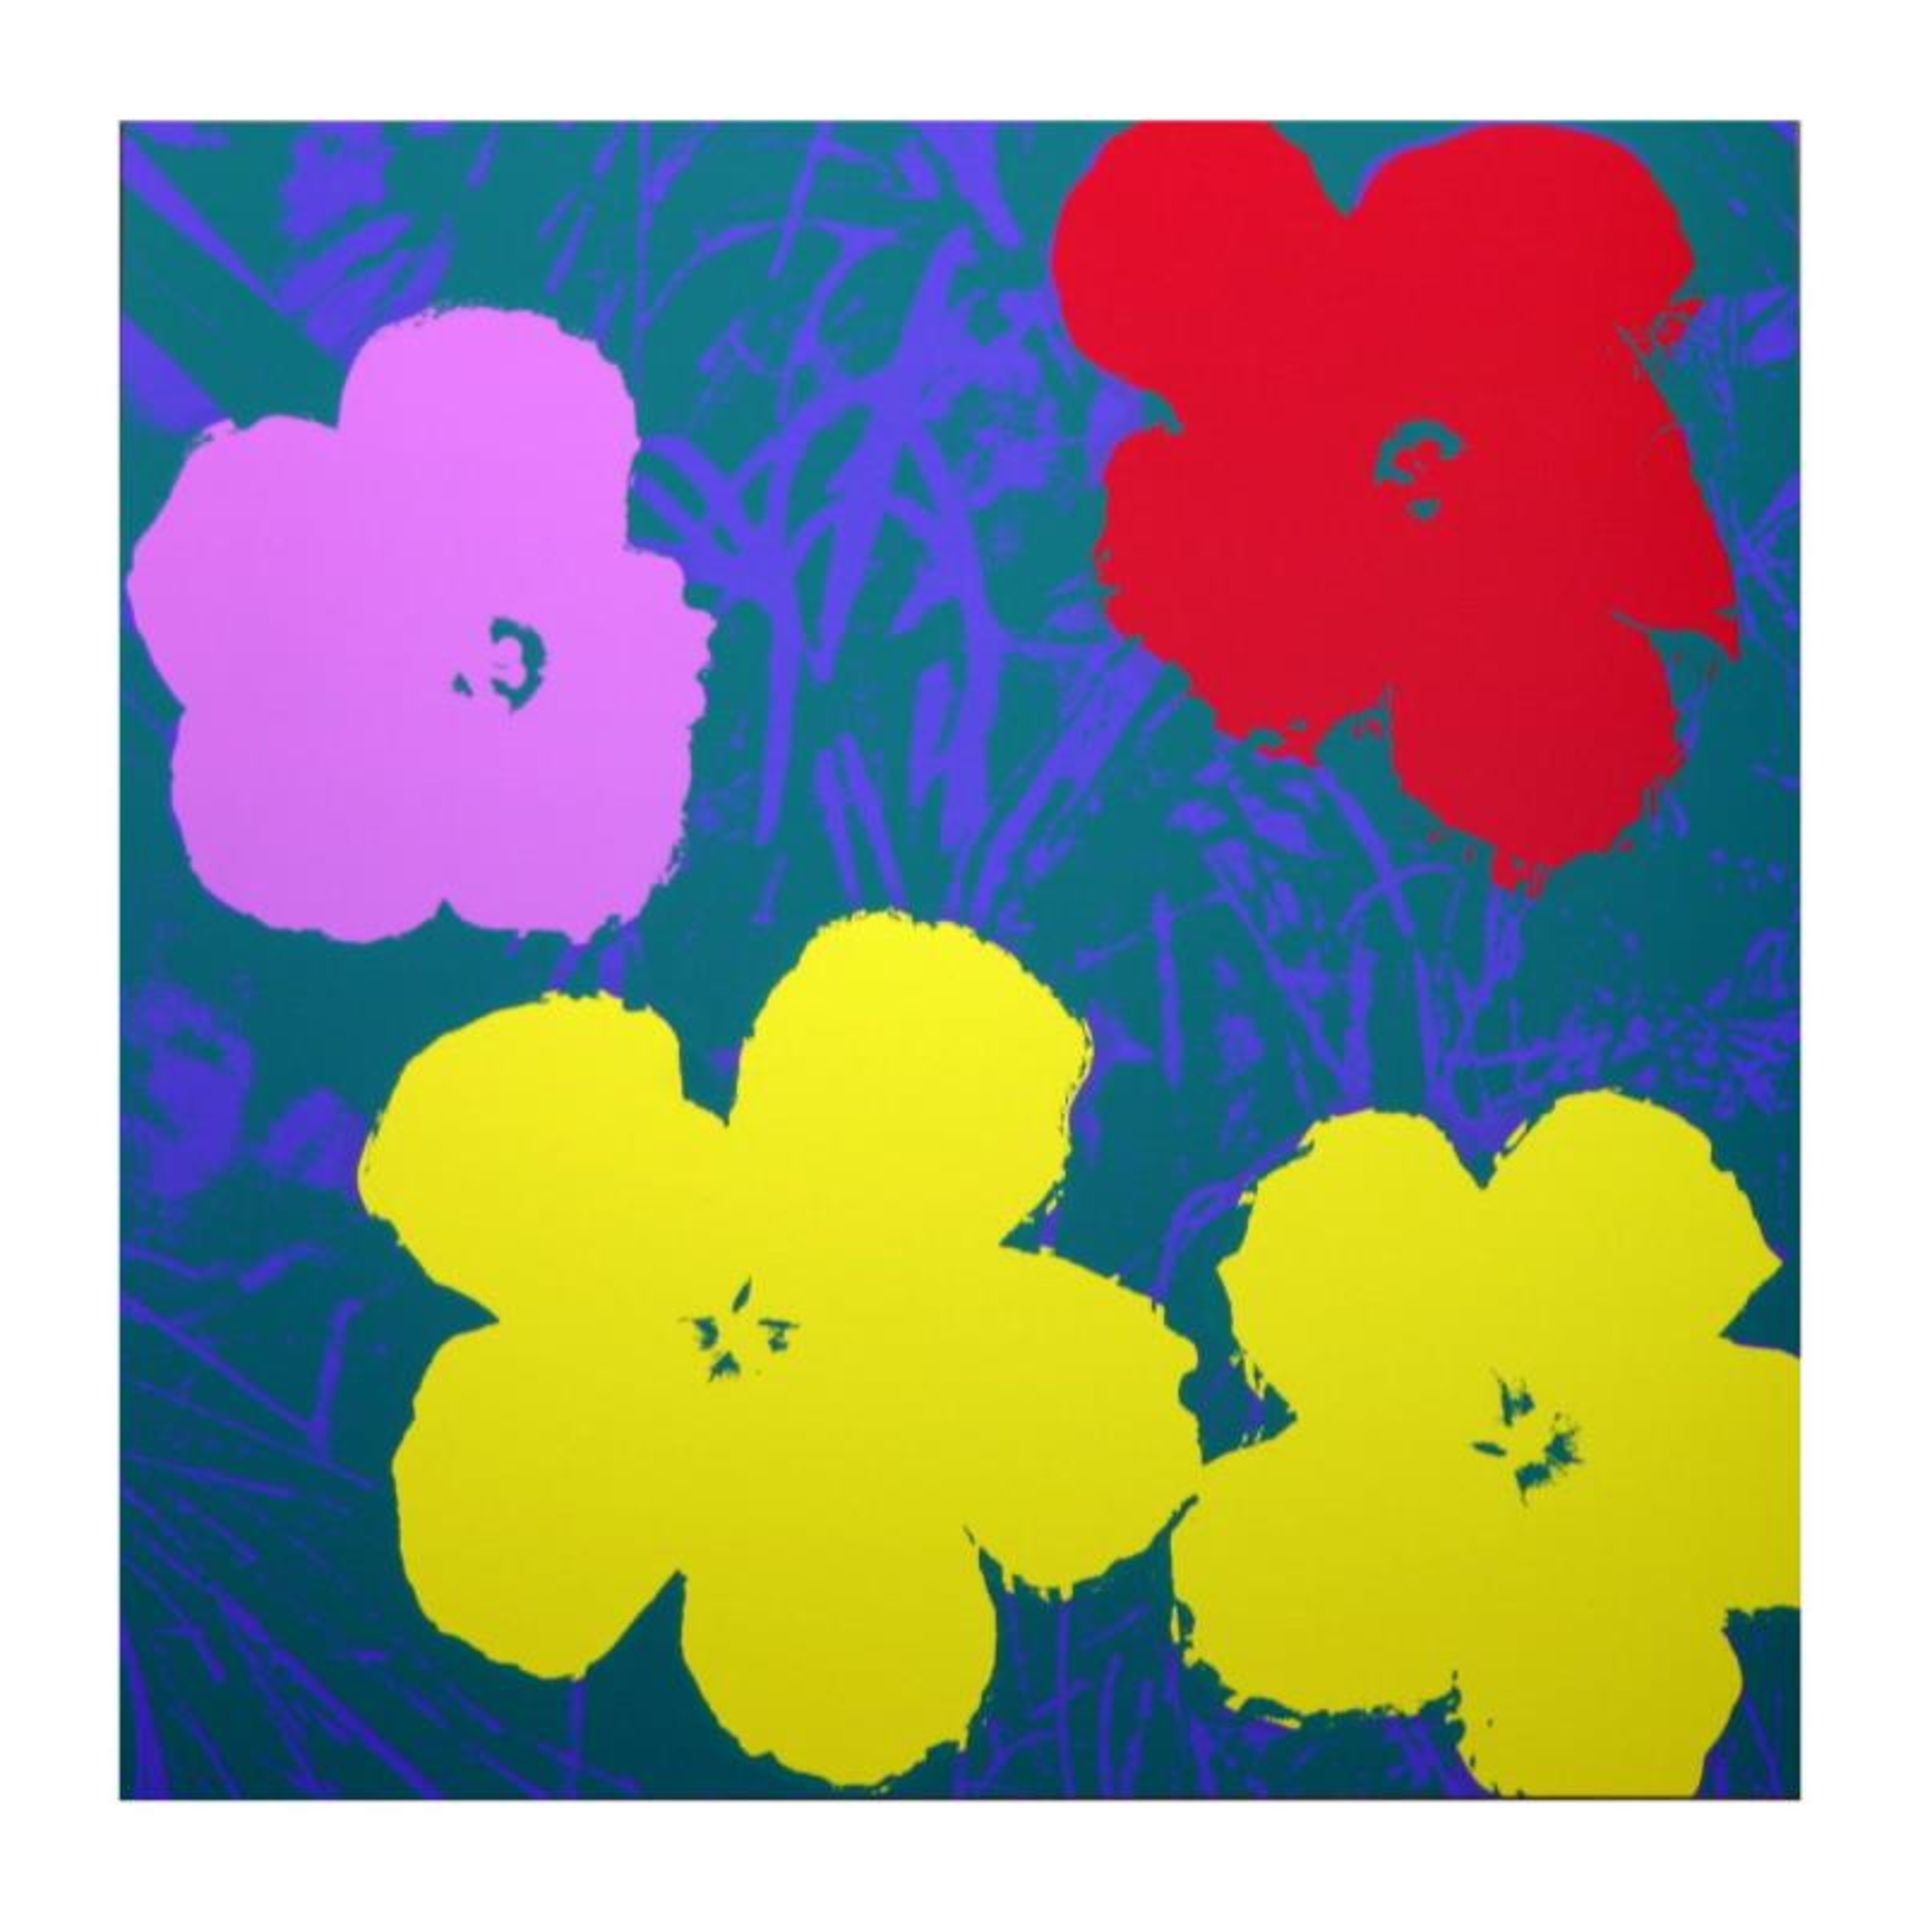 Andy Warhol "Flowers Portfolio" Suite of 10 Silk Screen Prints from Sunday B Mor - Image 3 of 3